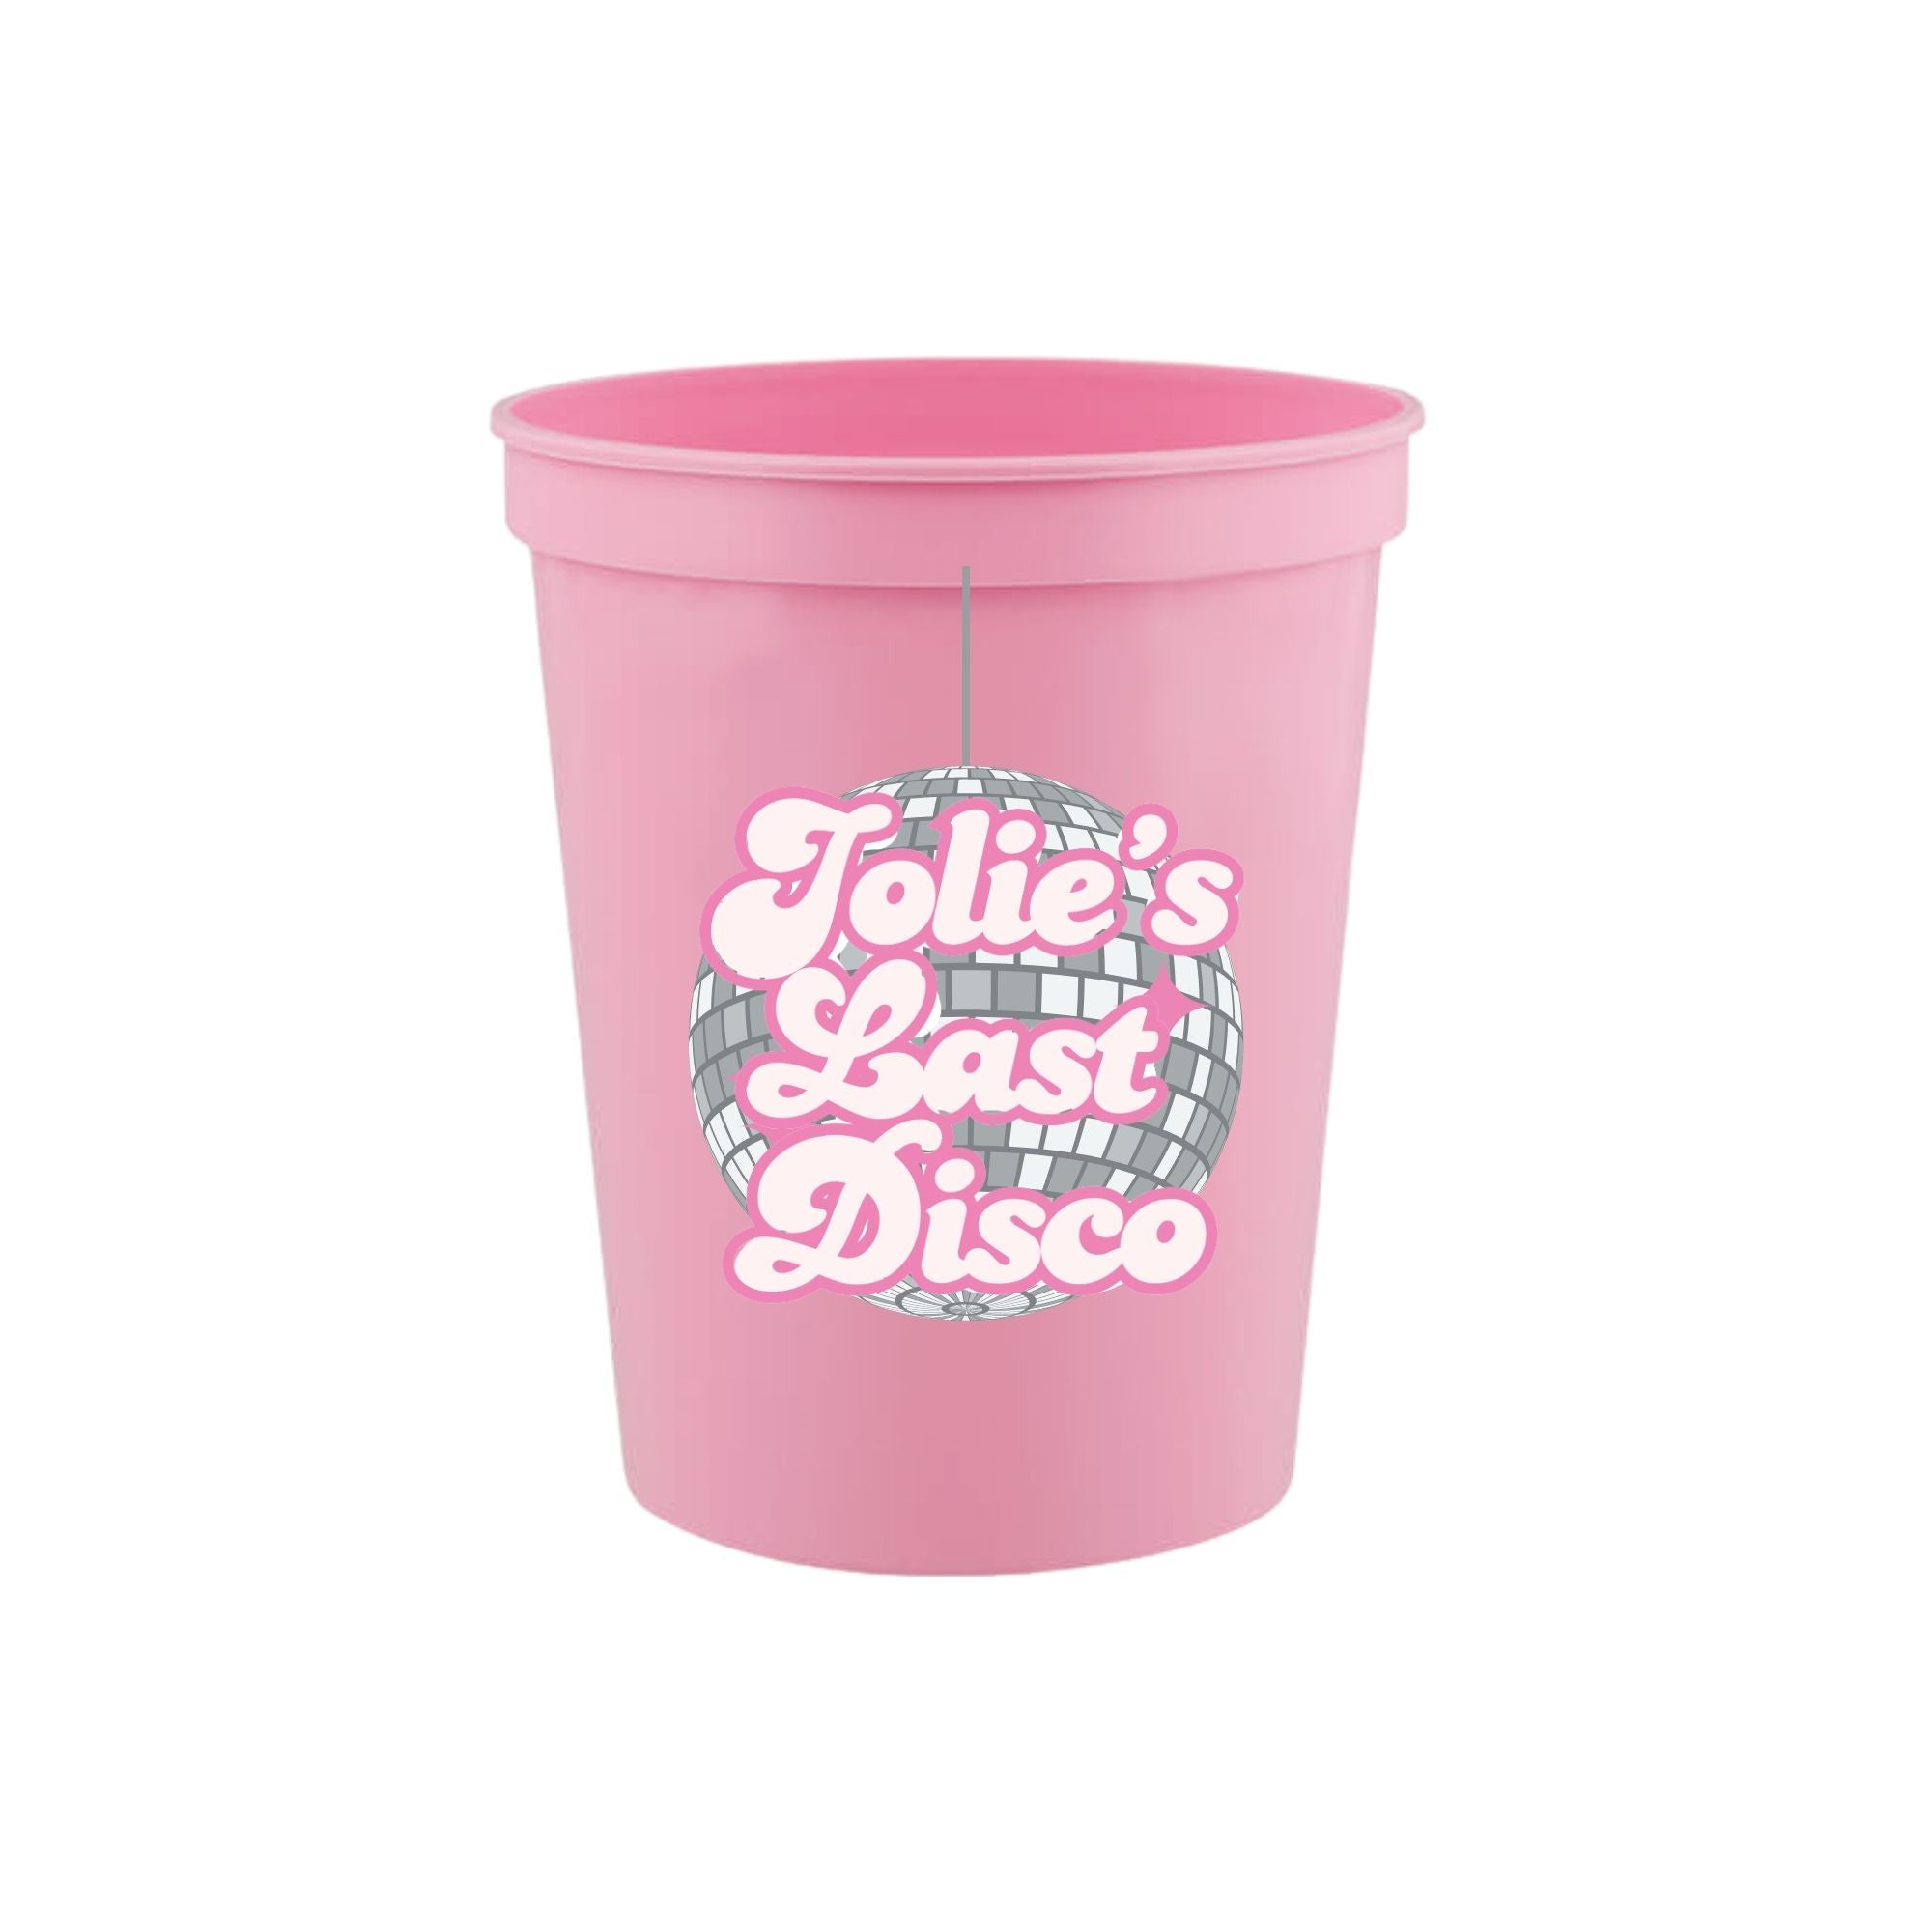 Custom Disco Ball Stadium Cup (set of 10) - Sprinkled With Pink #bachelorette #custom #gifts